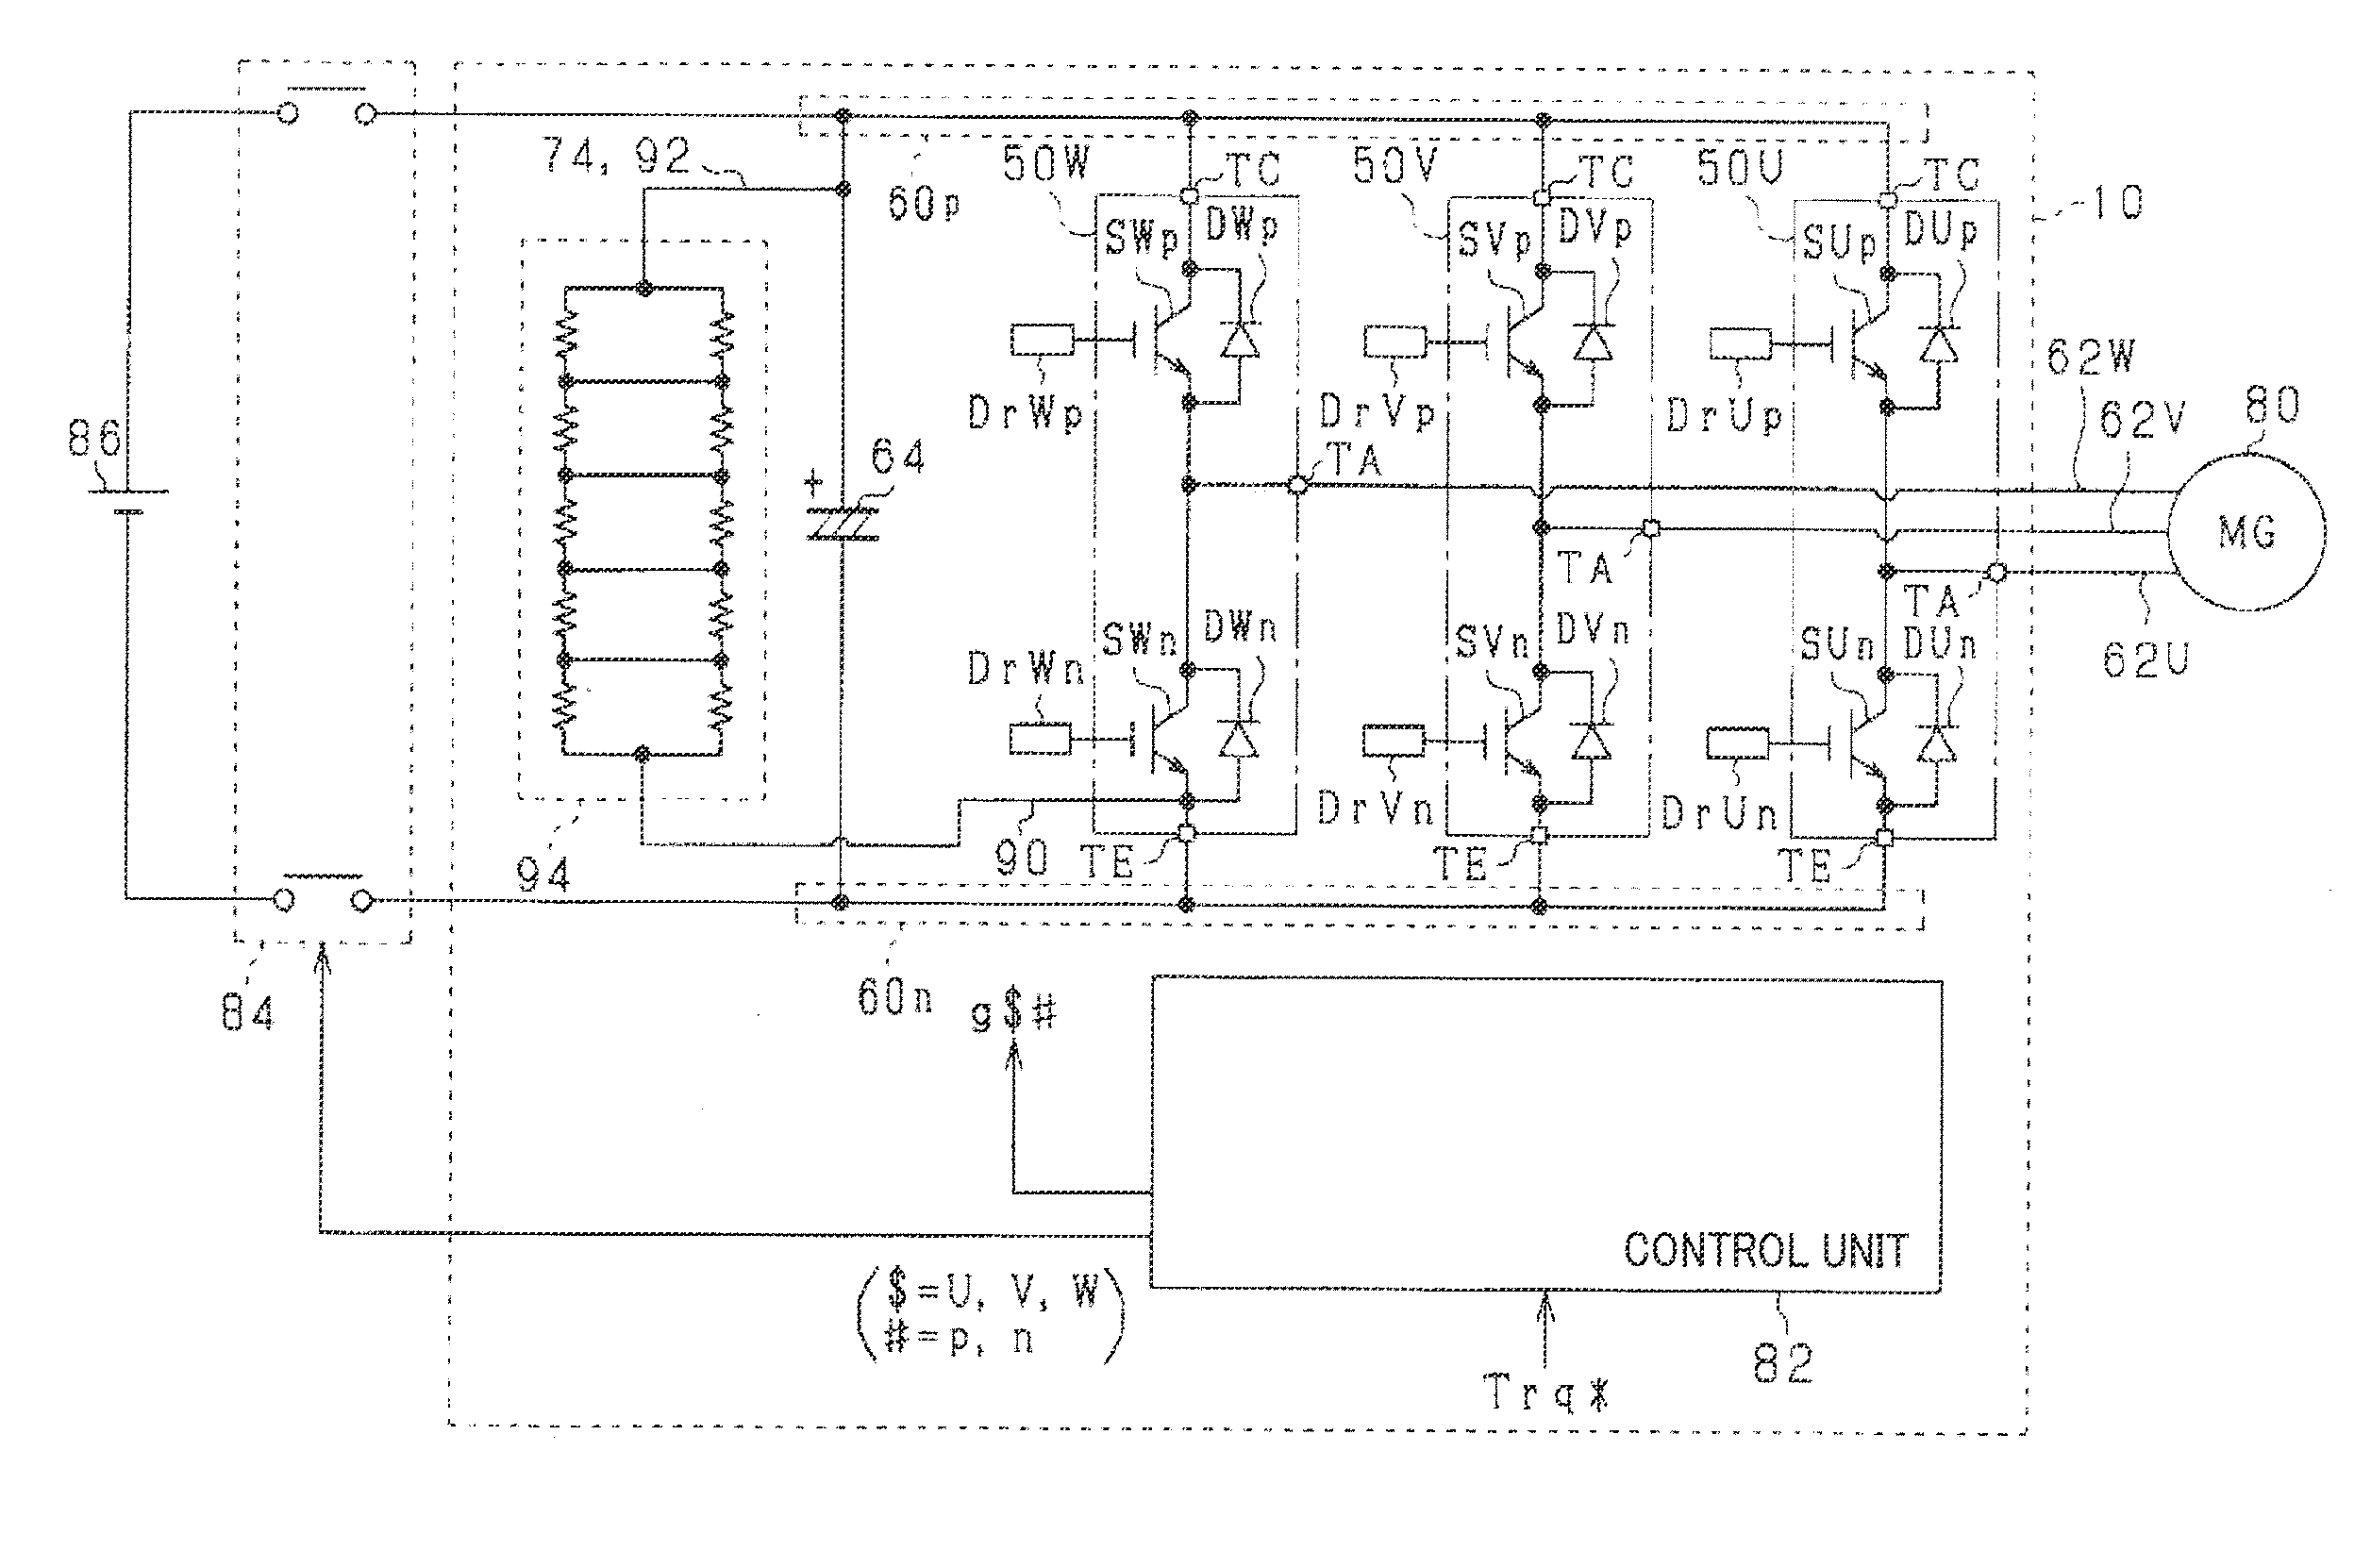 Power converter including smoothing capacitor and discharge resistor